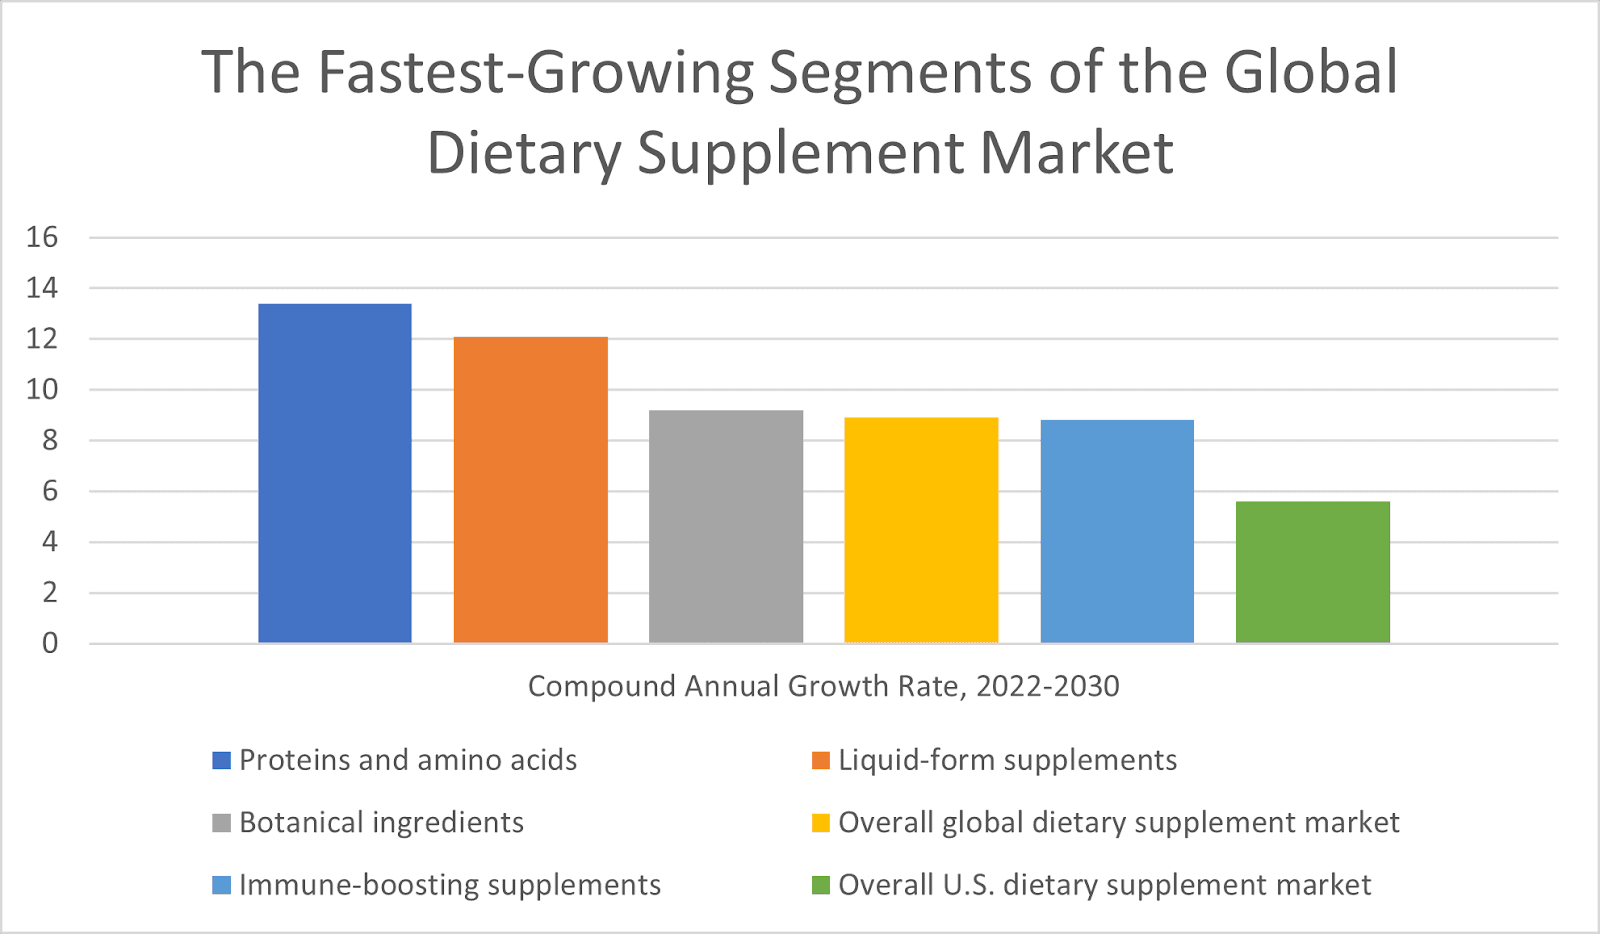 Fastest-growing segments of the global dietary supplement market